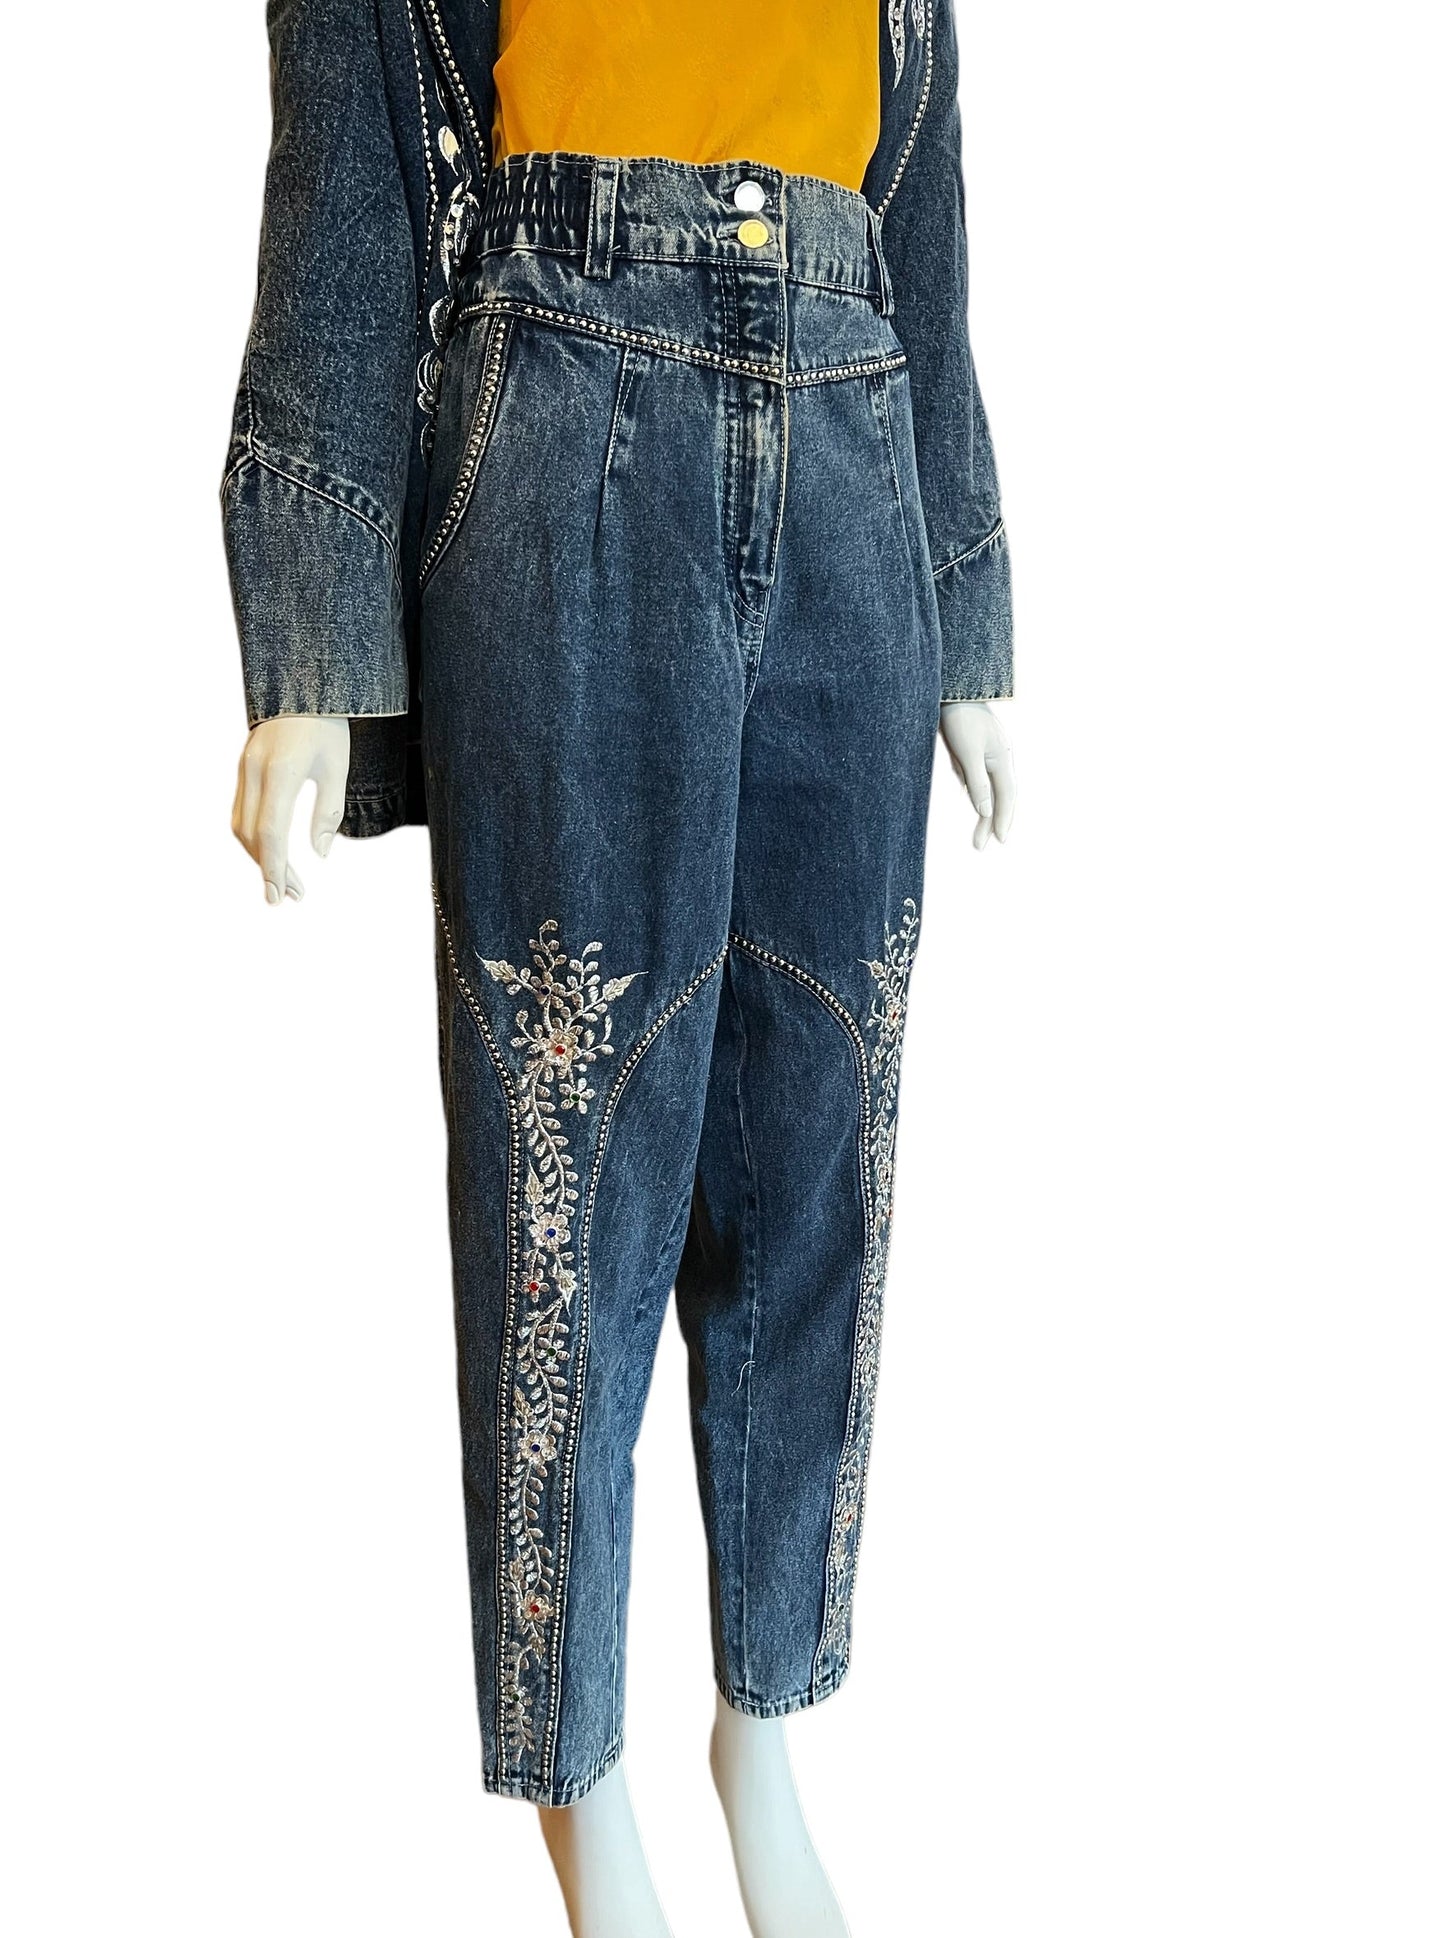 x80's embellished denim suit, denim blazer with rhinestones embroidery sequins, high waisted denim with elastic and multi-button studs, costume